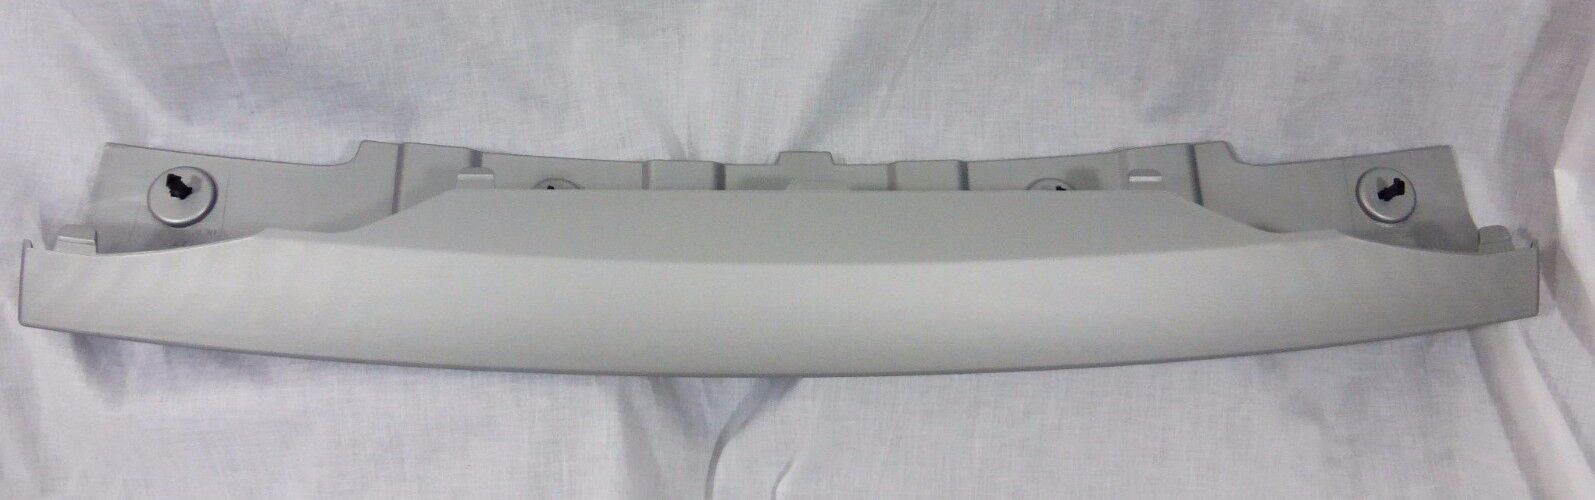 Land Rover OEM LR4 Discovery 4 White Techno Silver Front Bumper Trim 2014-2016